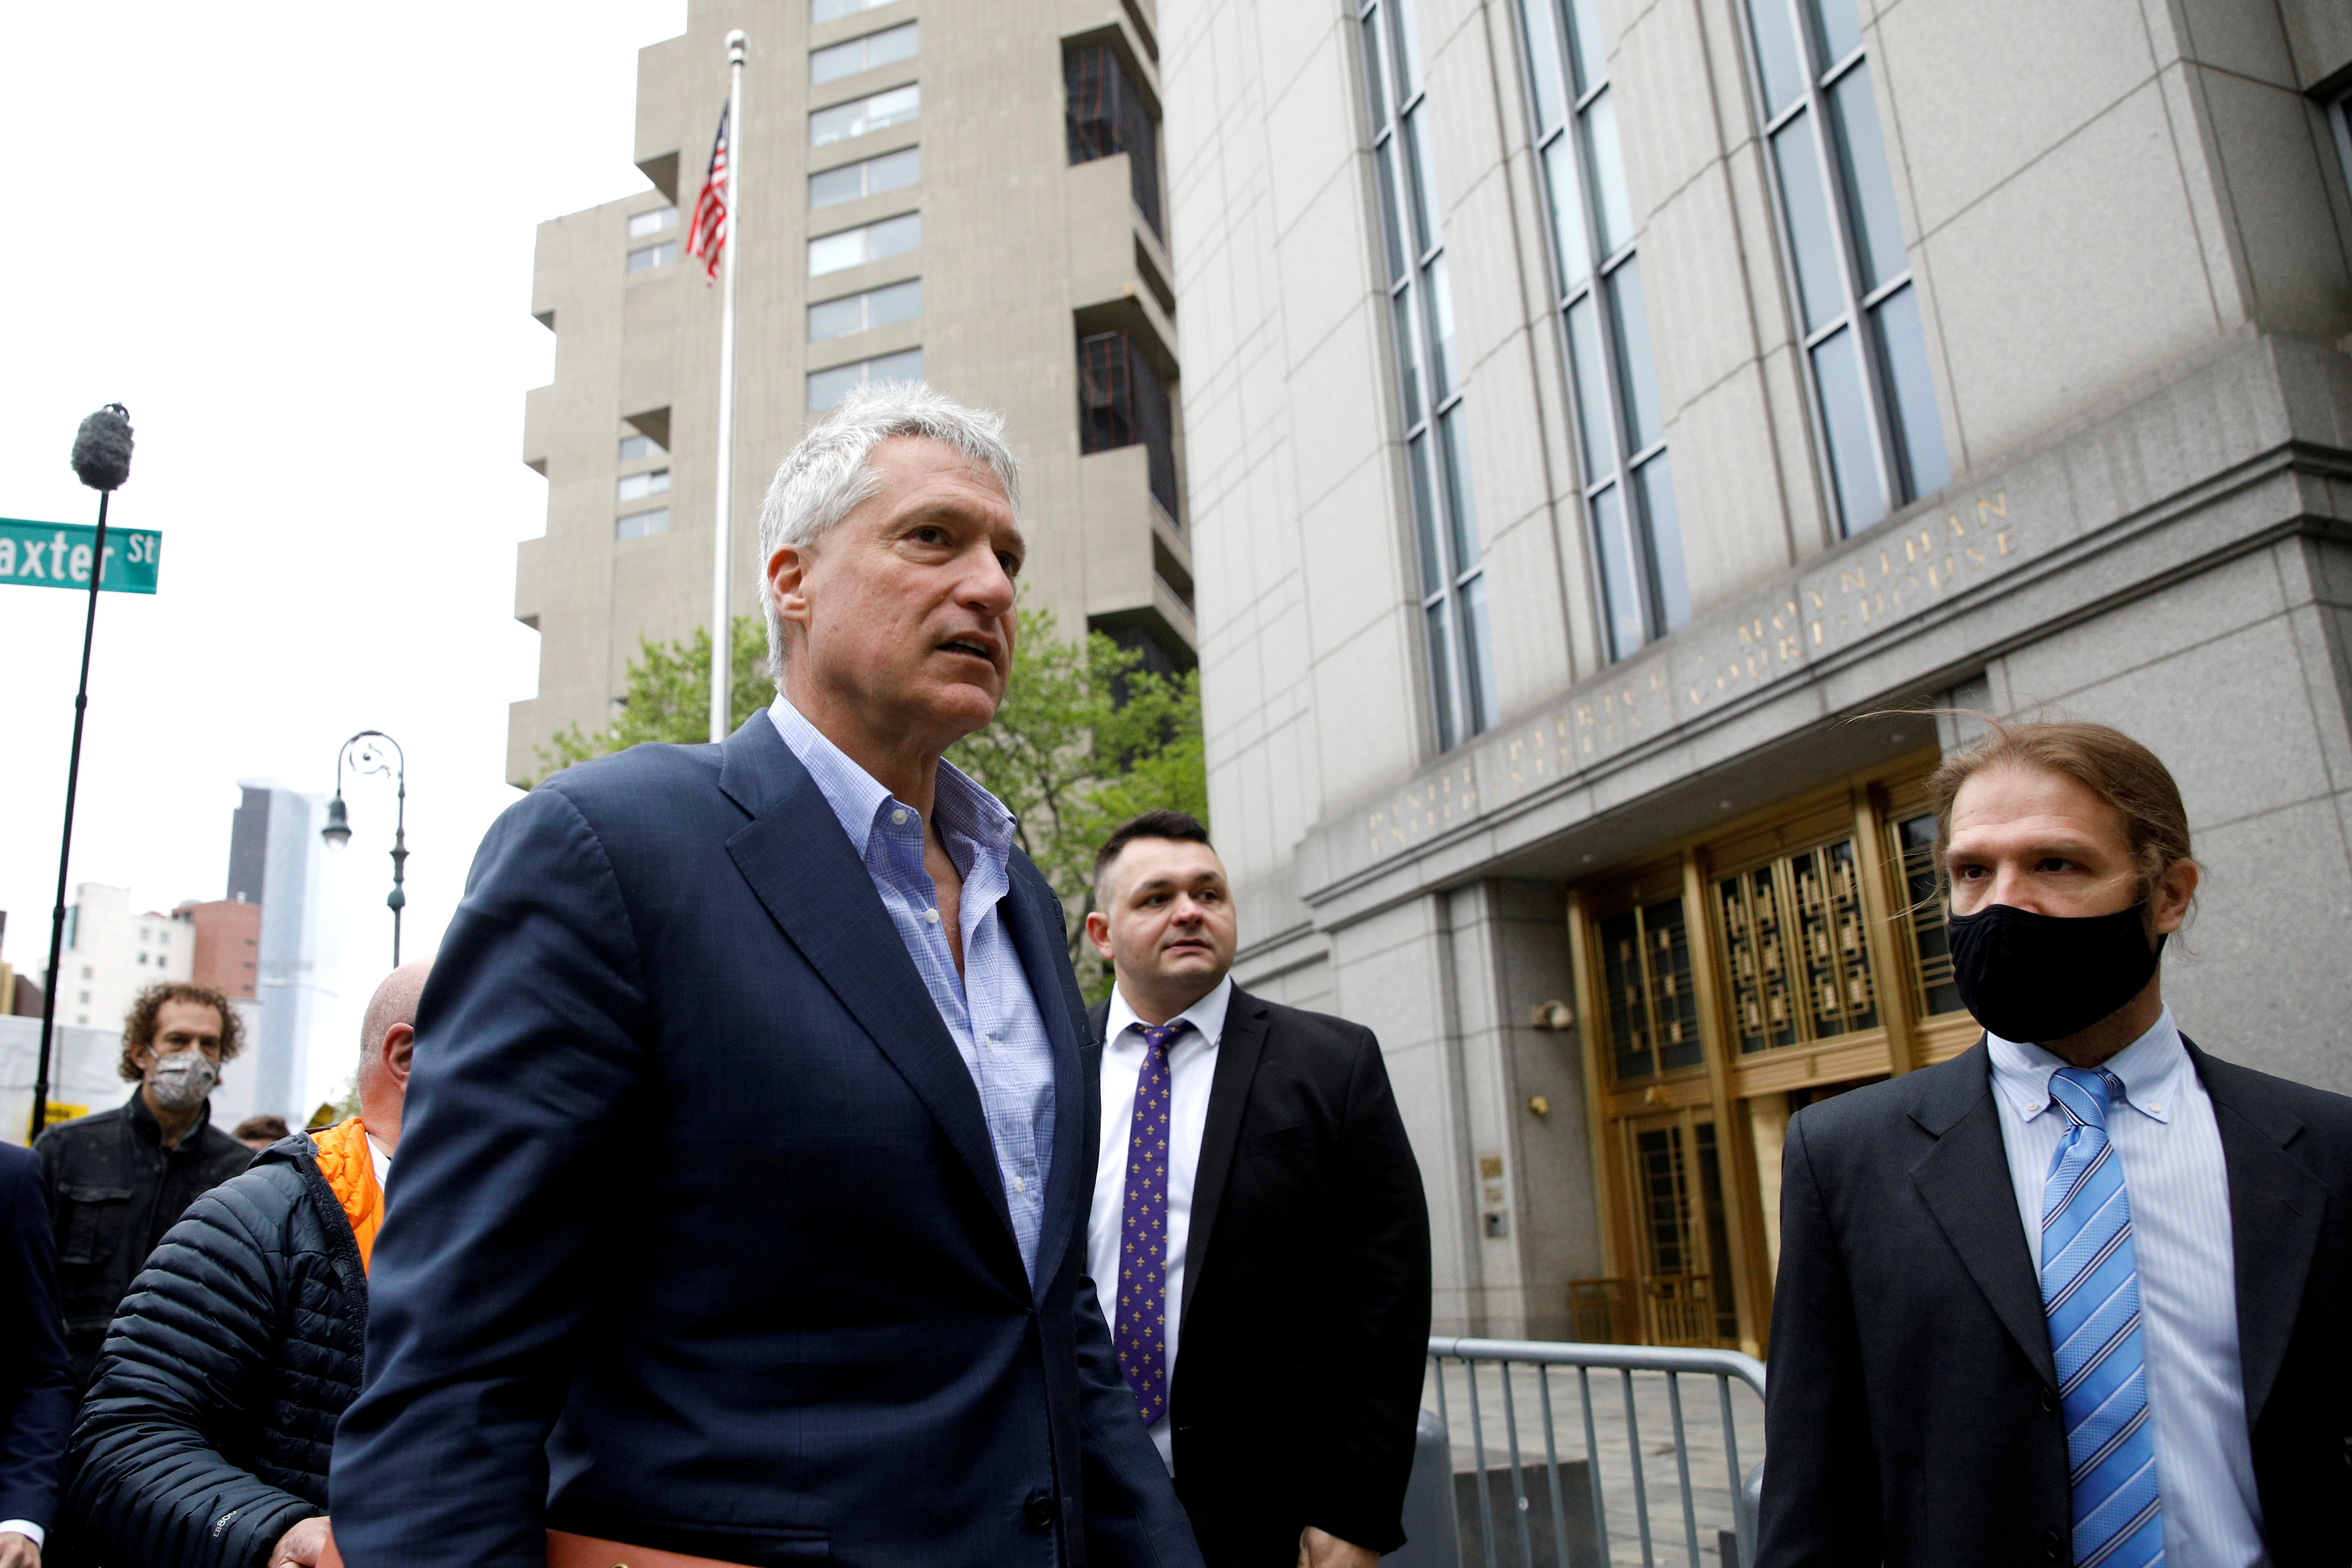 Attorney Steven Donziger, who won a multi-billion dollar judgment against Chevron on behalf of Ecuadorian villagers, arrives for his criminal contempt trail at the Manhattan Federal Courthouse in the Manhattan borough of New York City, New York, U.S. May 10, 2021.  REUTERS/Brendan McDermid